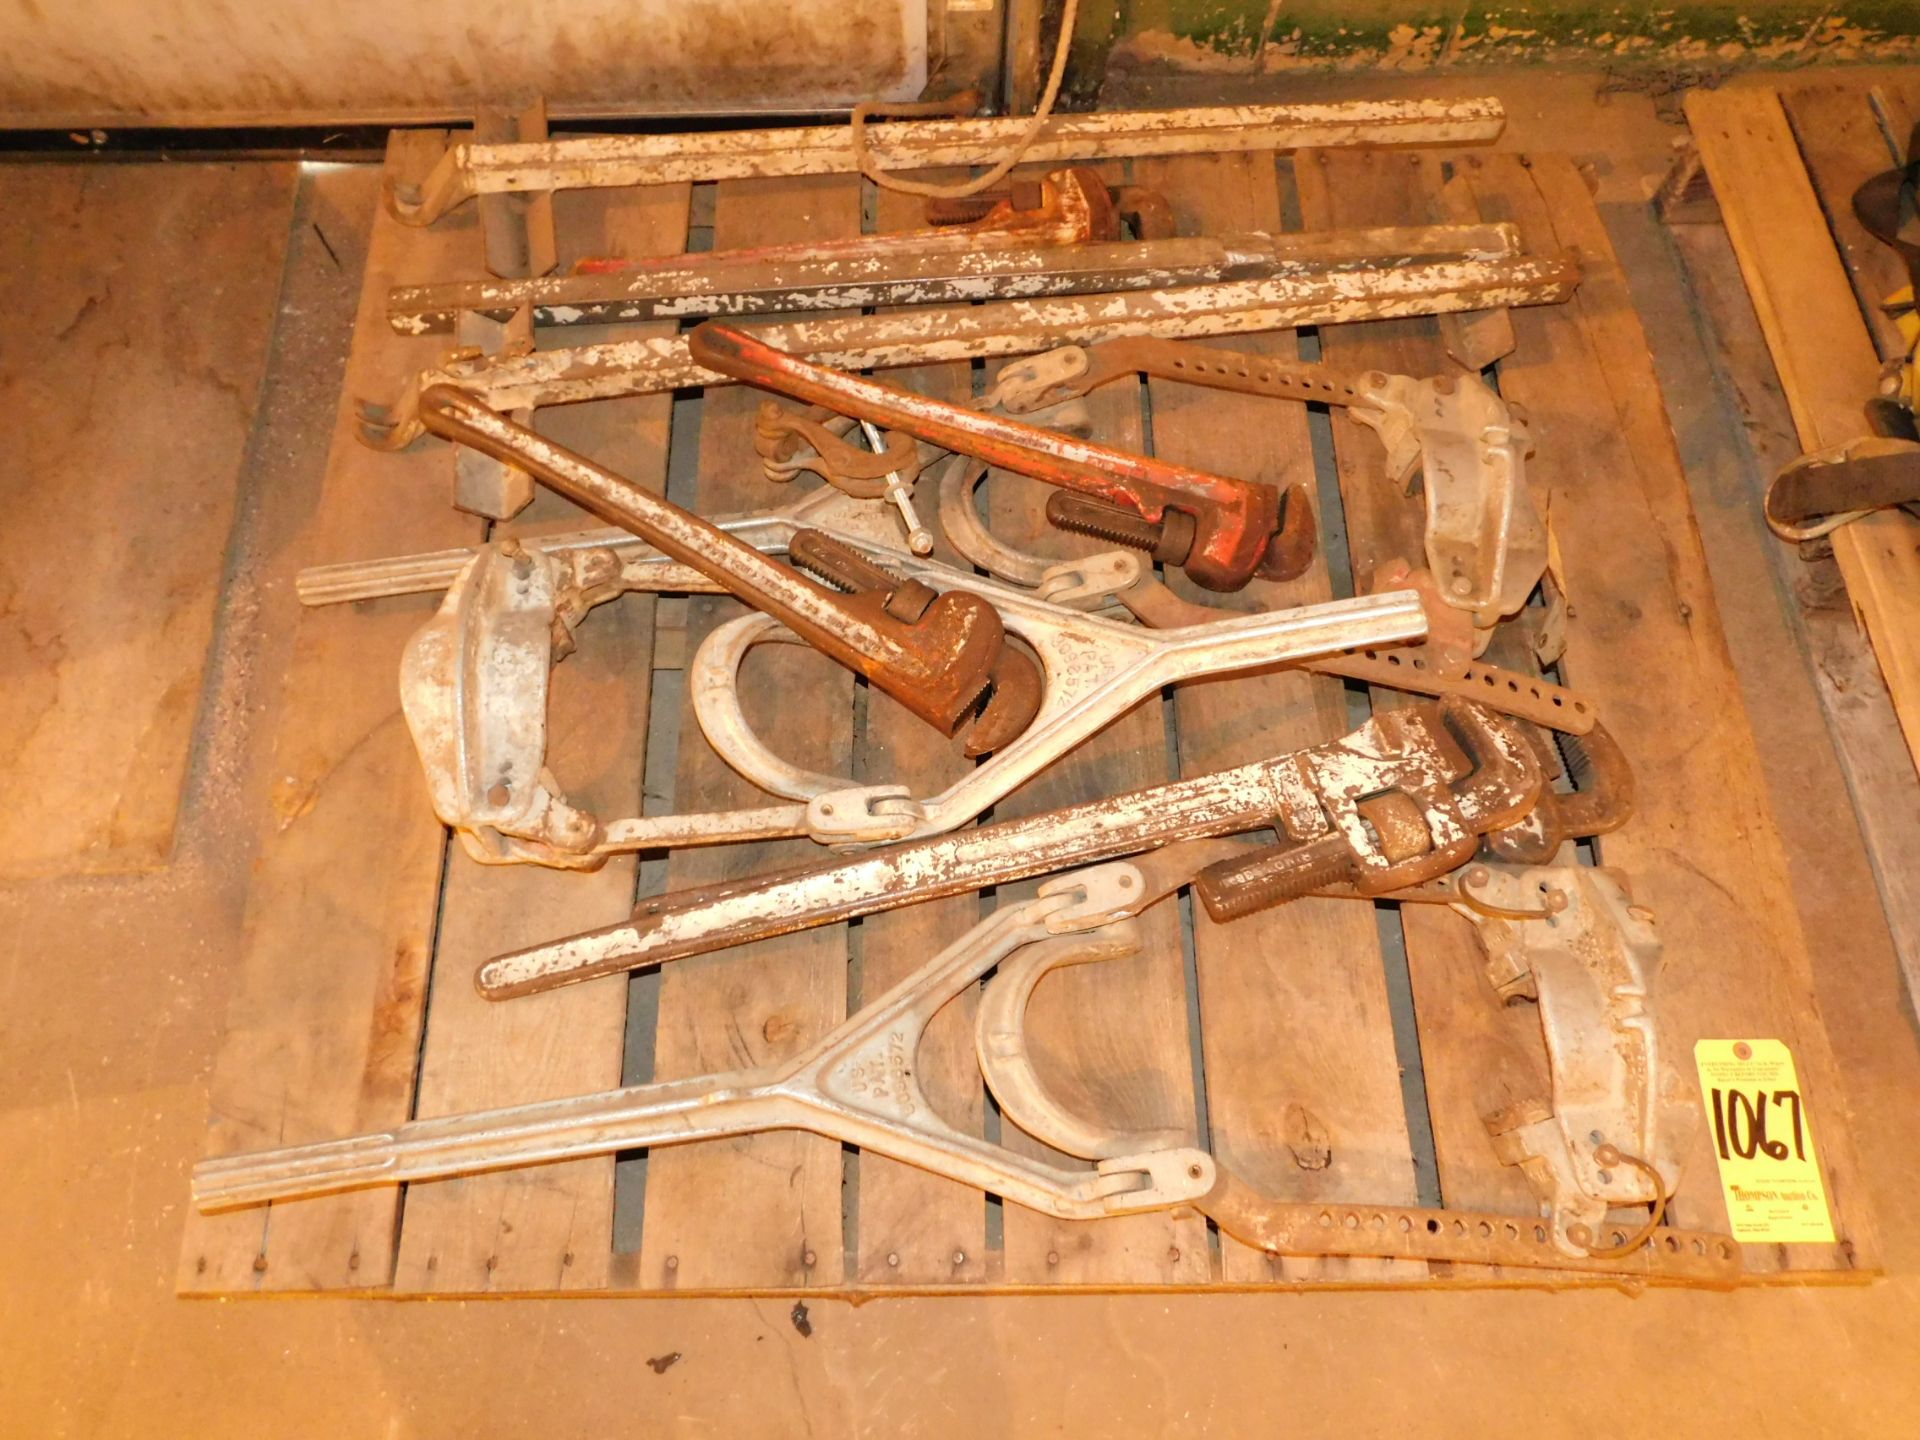 Pipe Wrenches and Pipe Handling Tools-Skid Lot